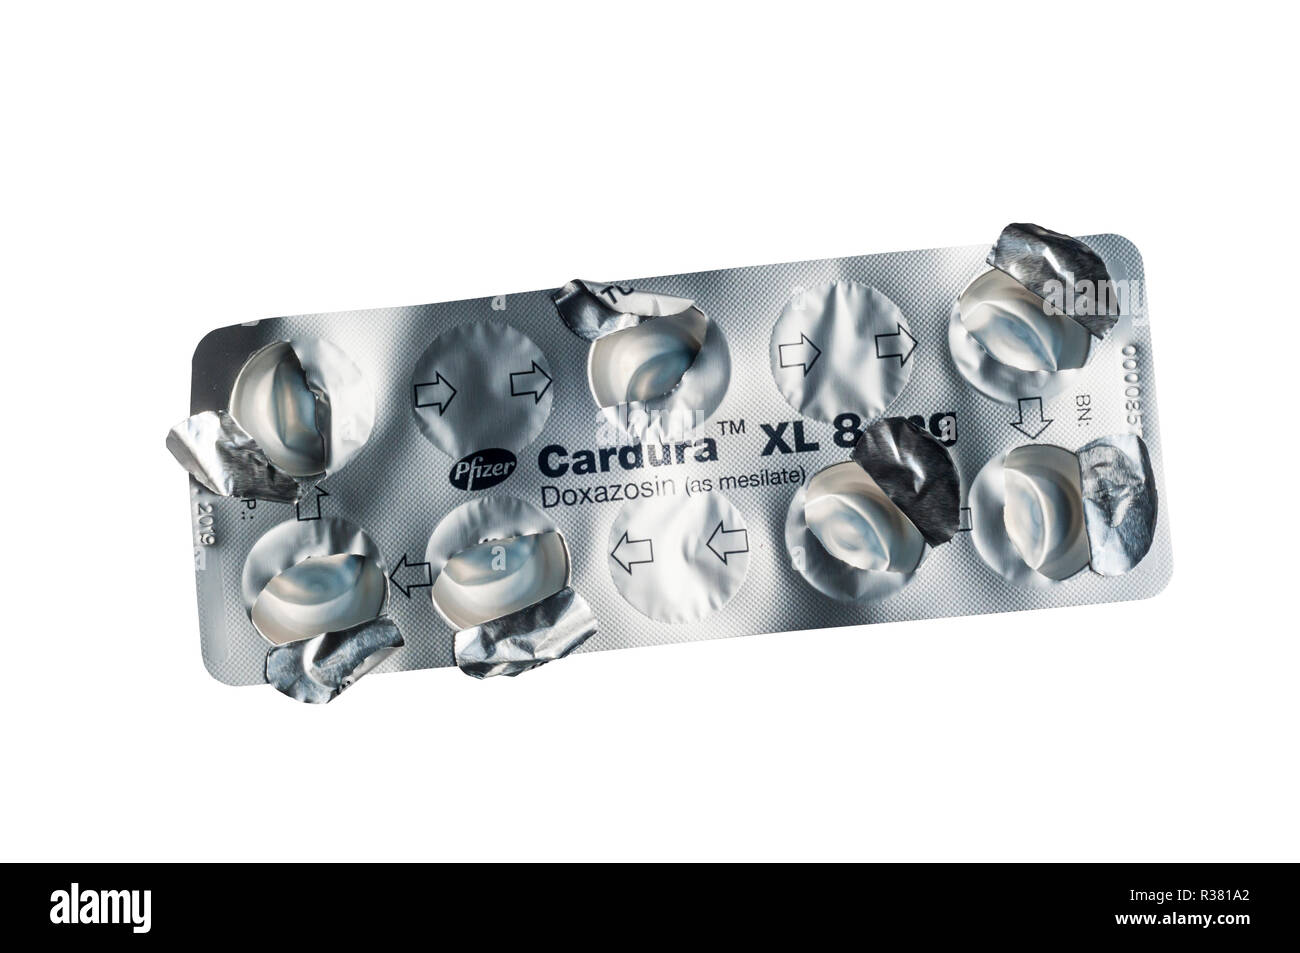 An empty used 7-day blister pack packet of Cardura Doxazosin tablets used to control high blood pressure or hypertension. Stock Photo